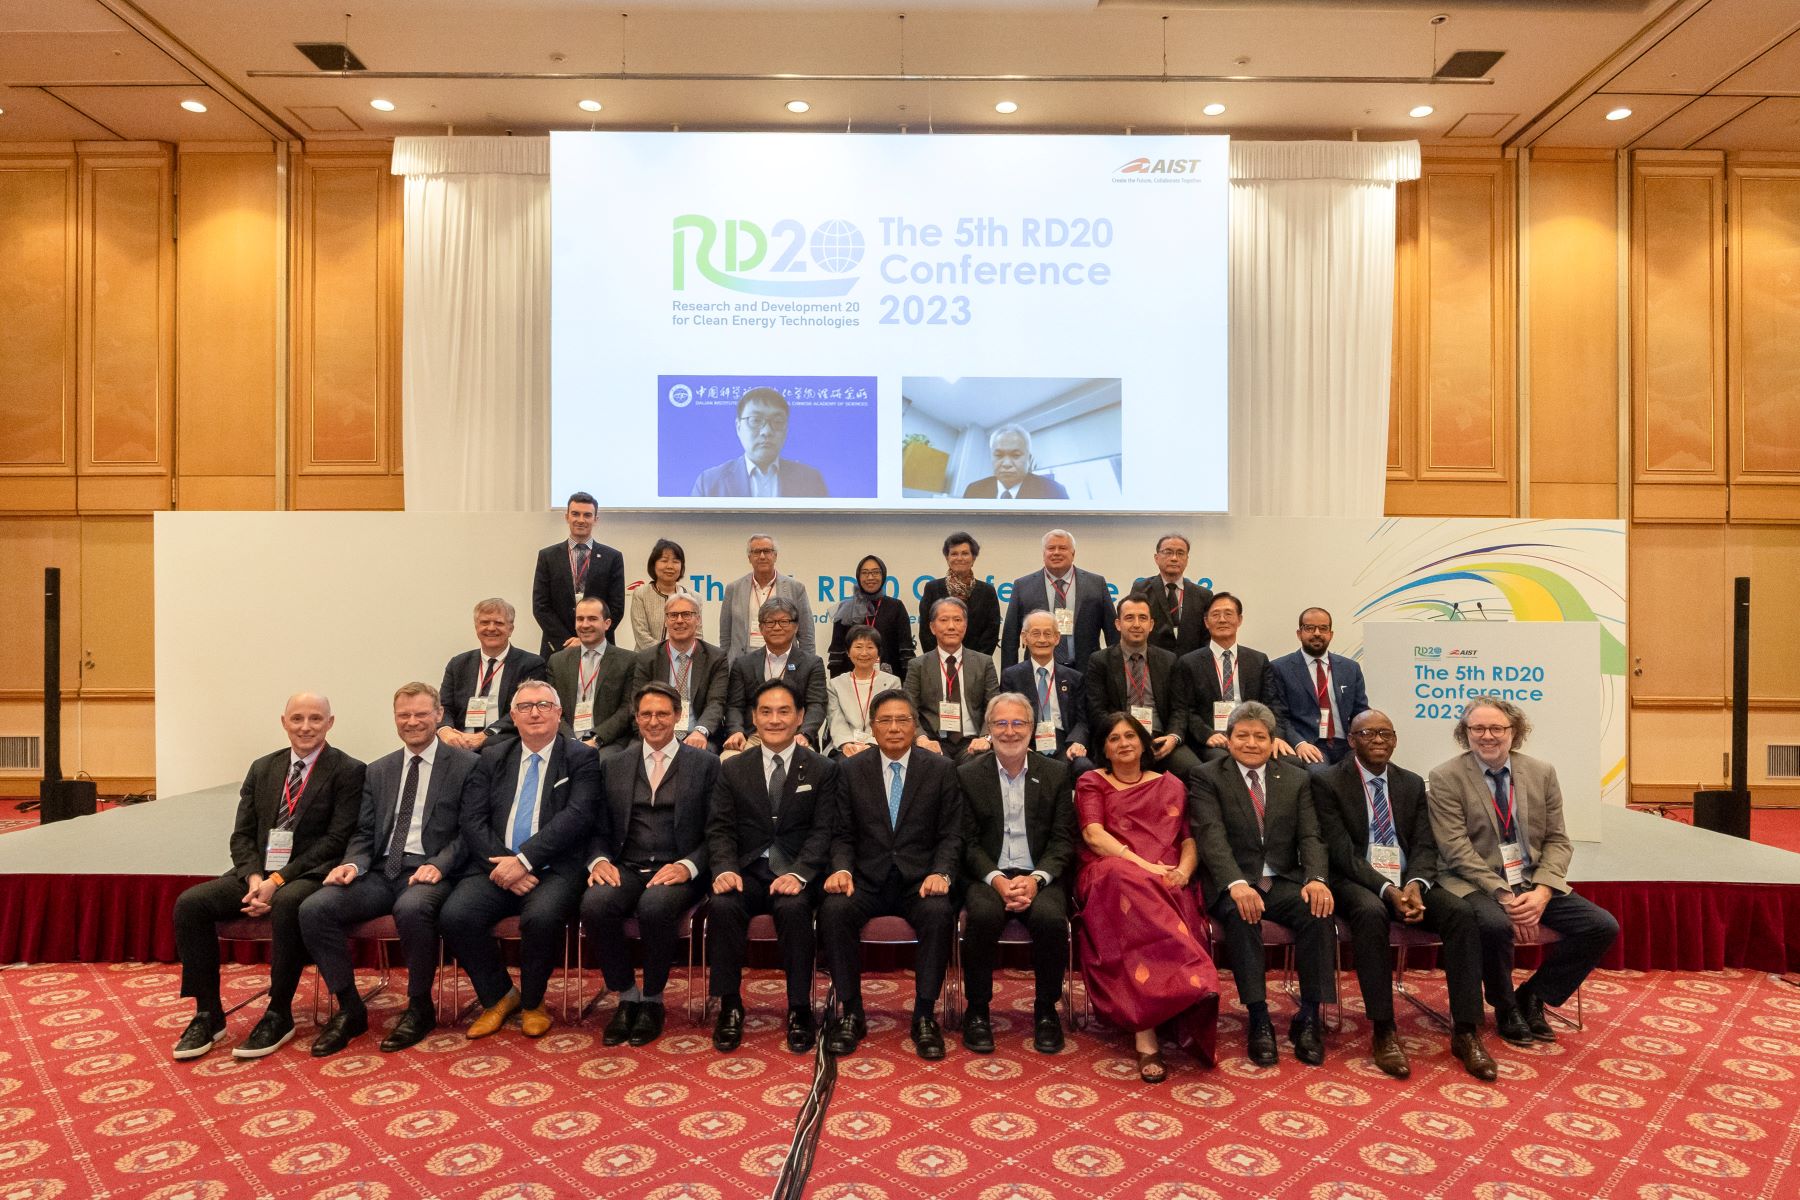 A summary video of the 5th RD20 Conference 2023 is available.